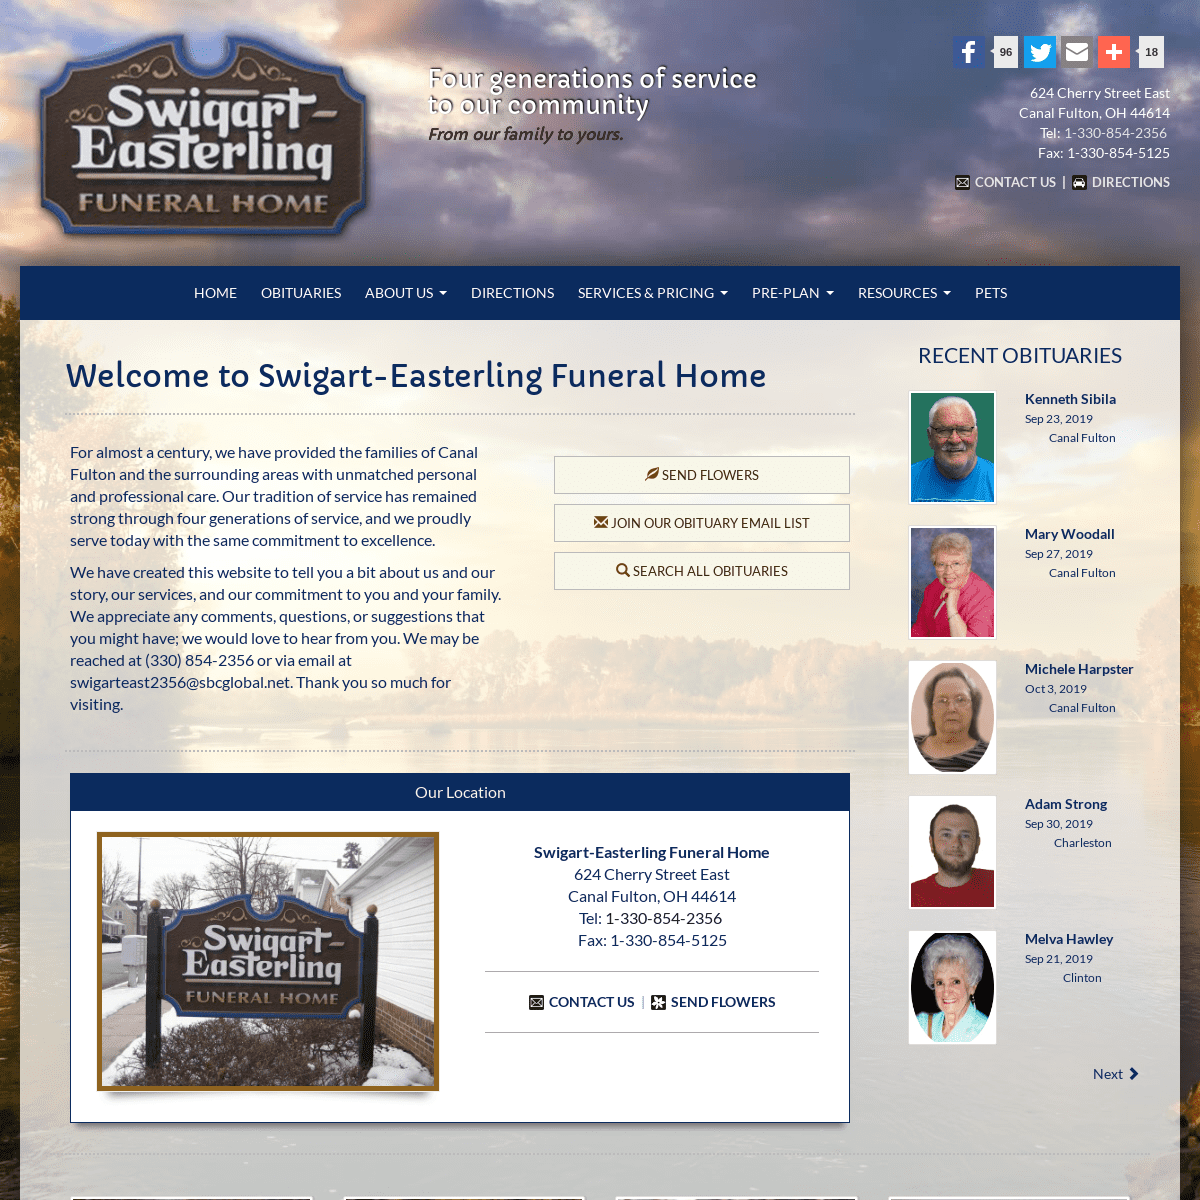 A complete backup of swigarteasterlingfuneralhome.com